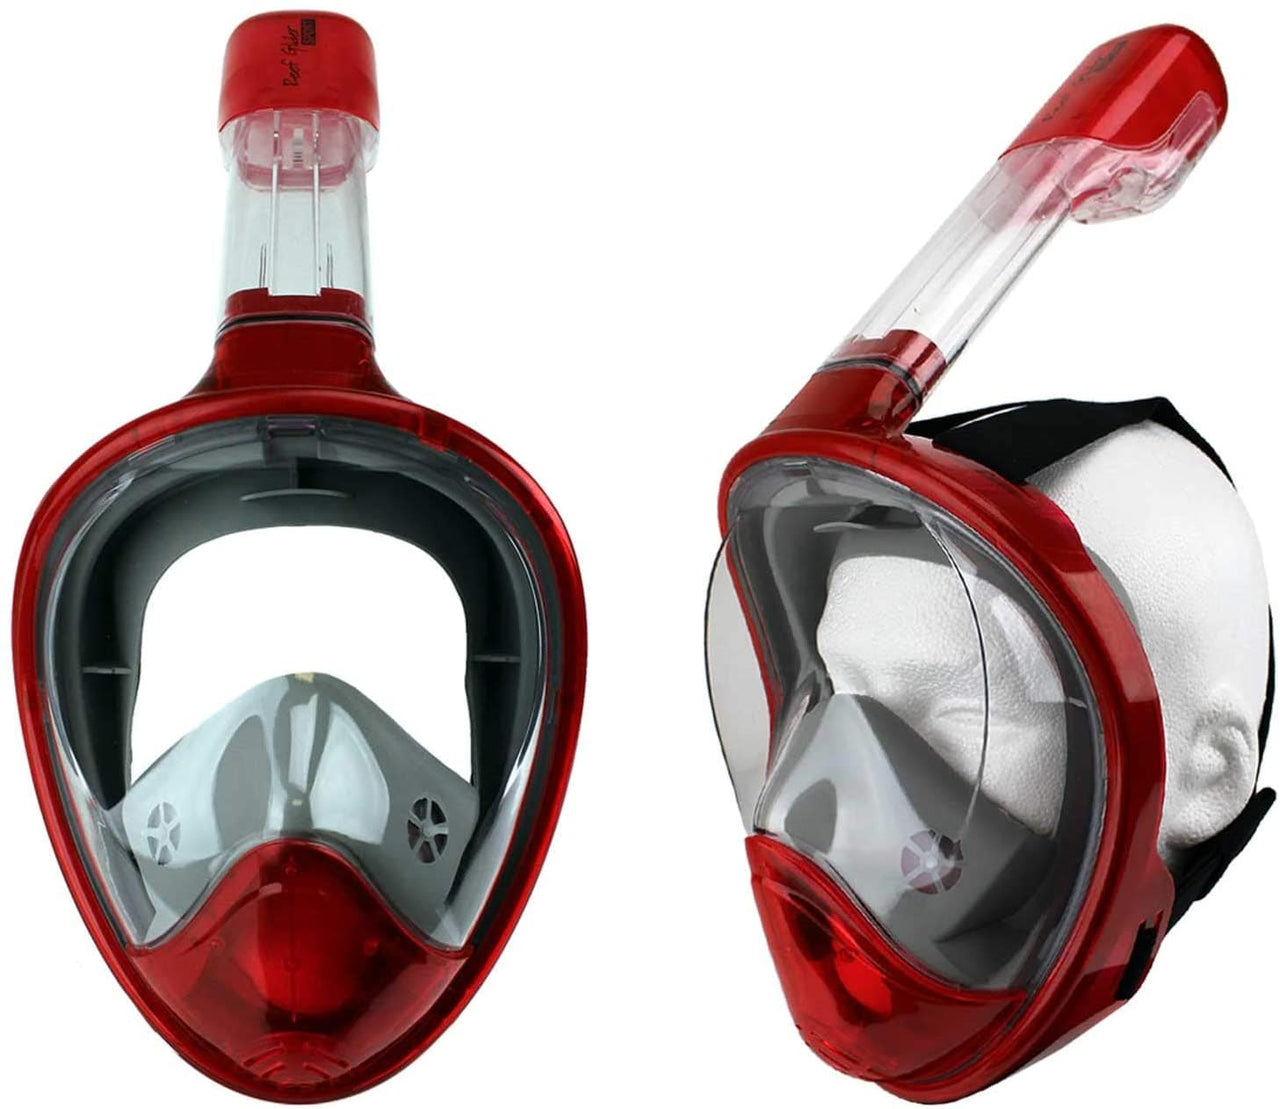 Reef Glider Full Face Snorkel Mask Set with Action Cam Mount red grey